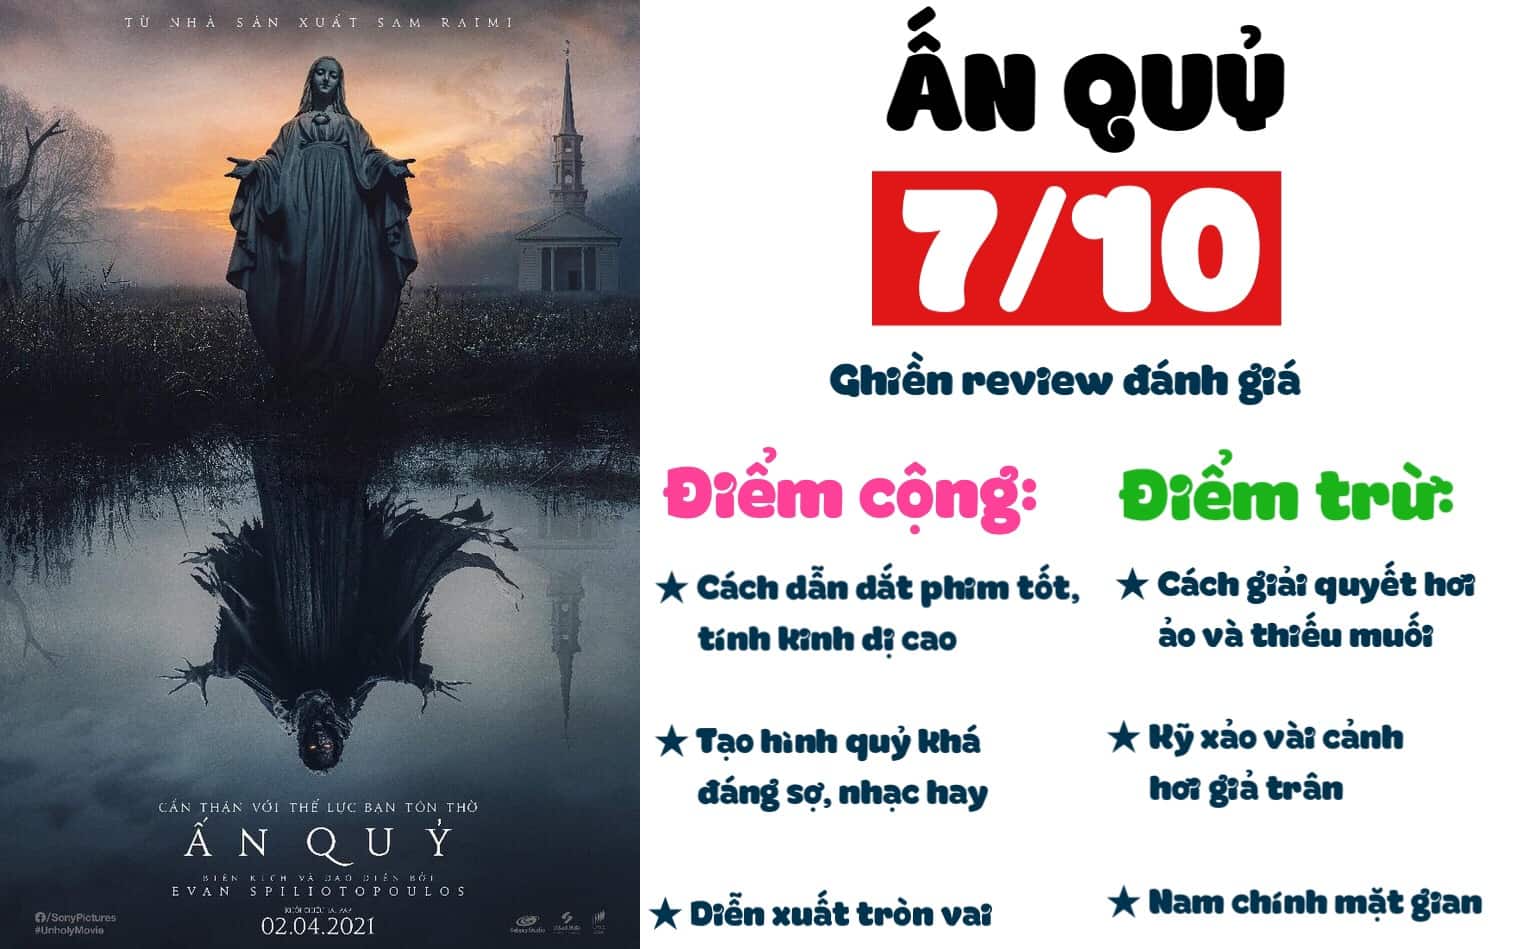 Ghien review - An quy - The unholy